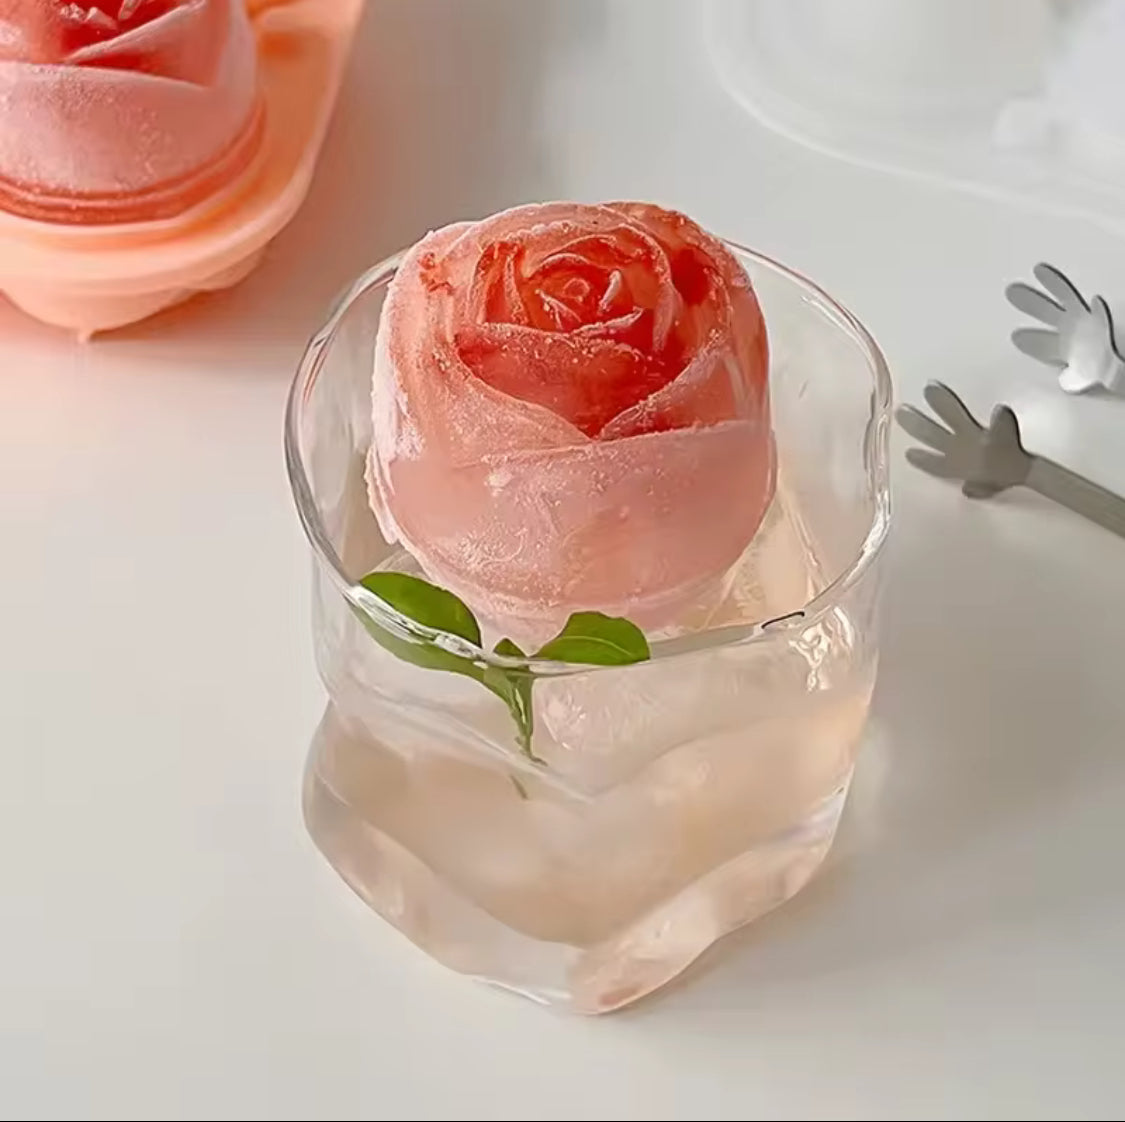 Silicone Rose Ice Mold, Flower Shaped Ice Mold, Silicone Big Ice Ball Maker